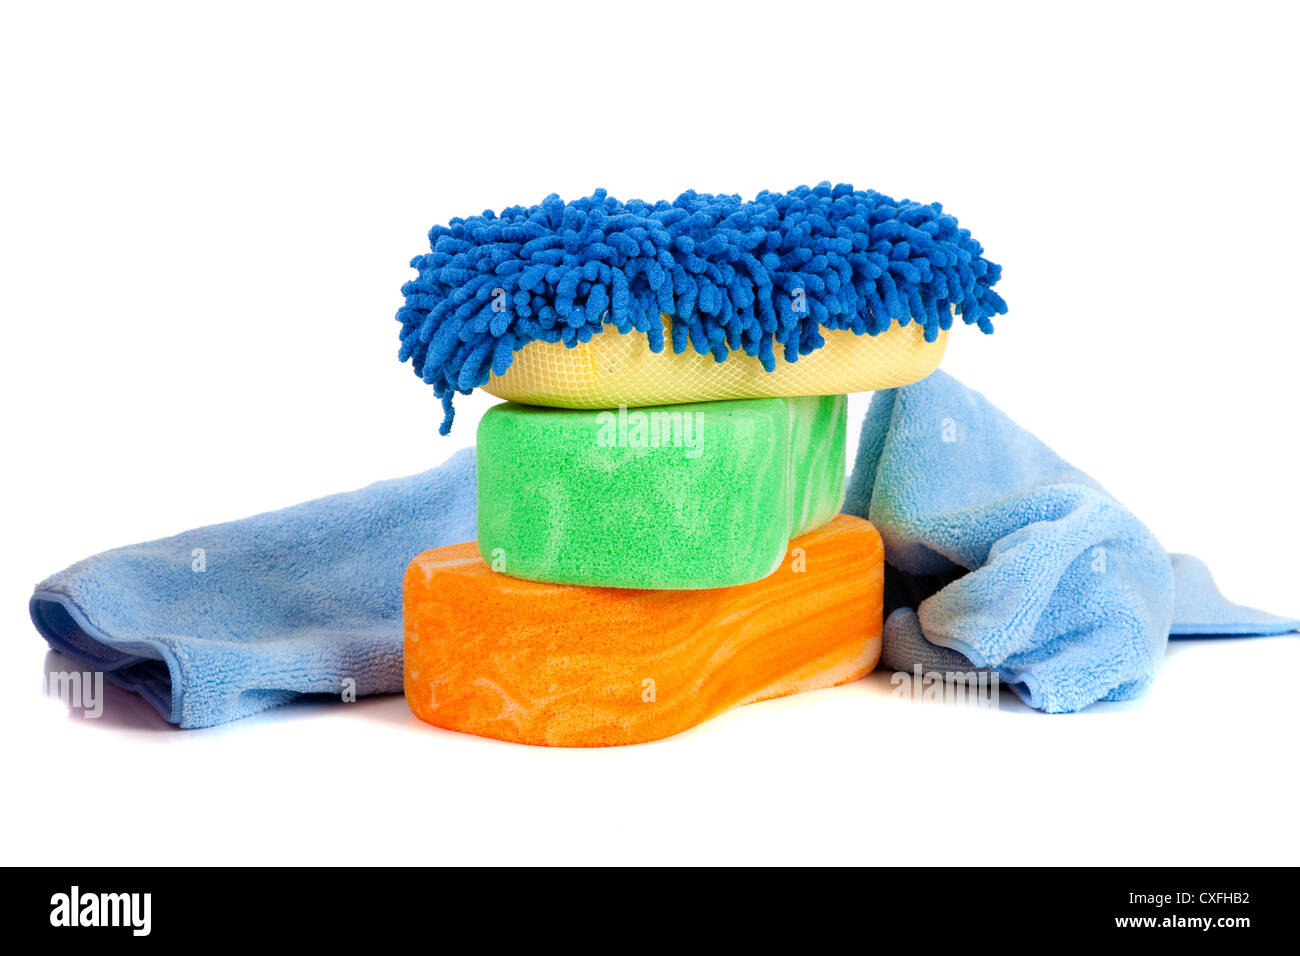 A blue chami with sponges on a white background Stock Photo